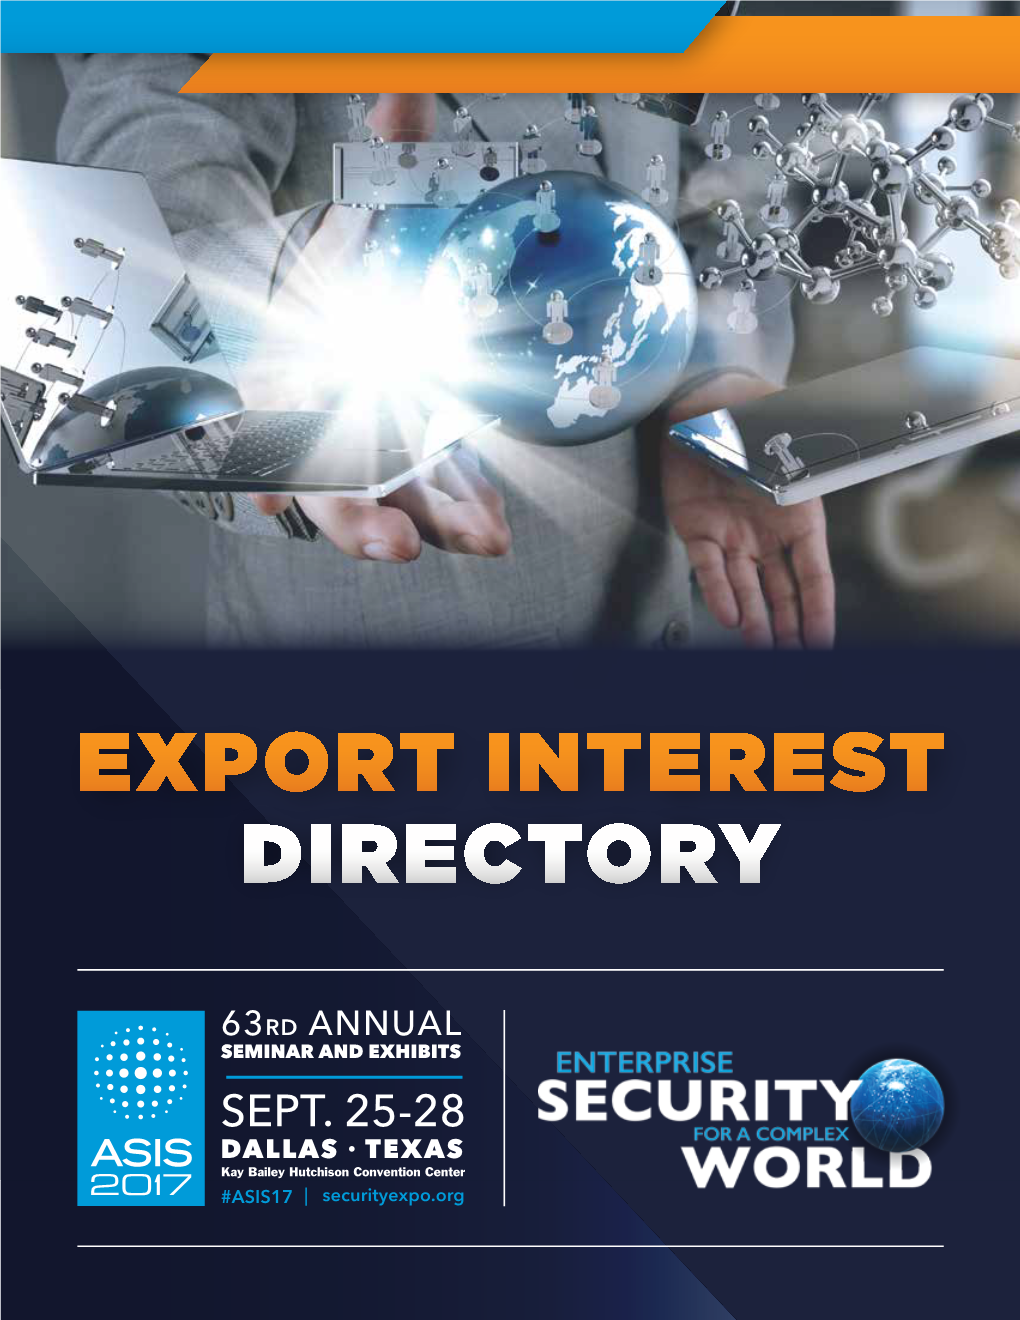 Asis 2017 Export Interest Guide